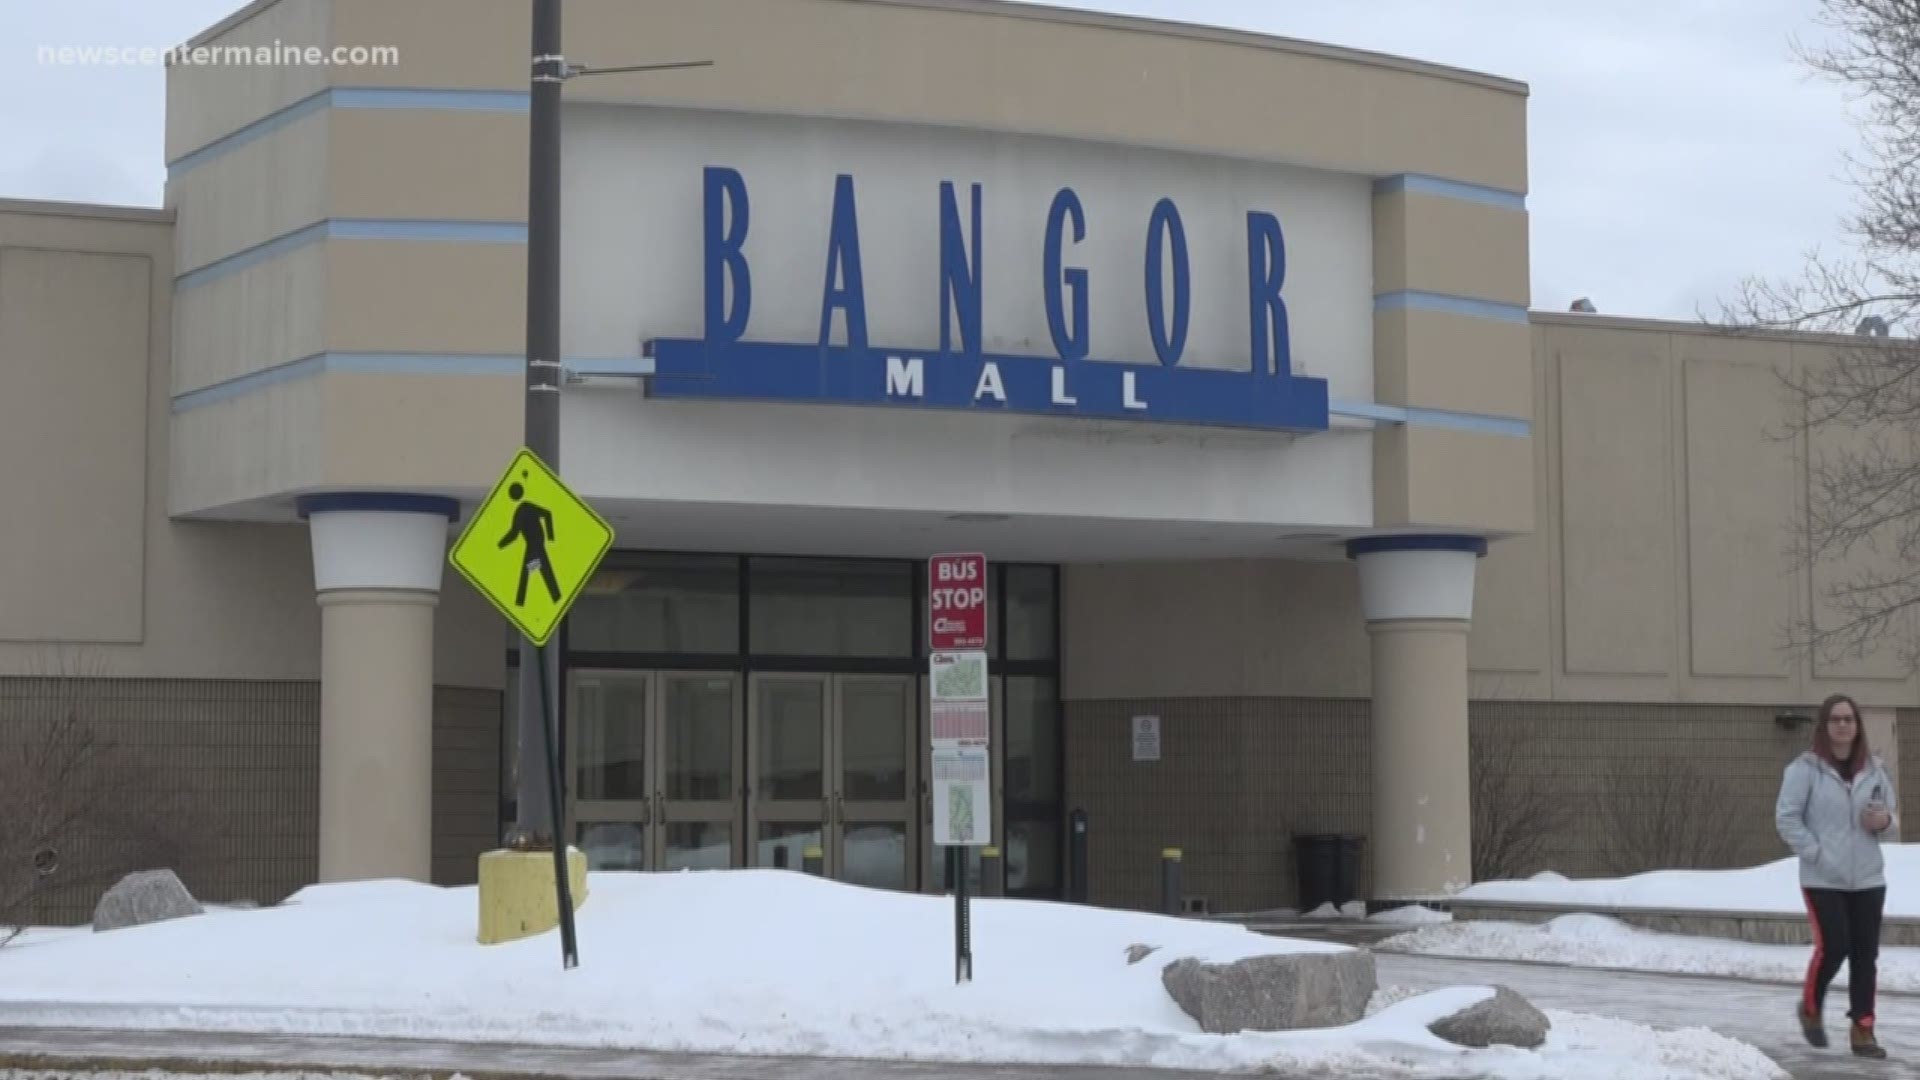 Bangor Mall up for auction